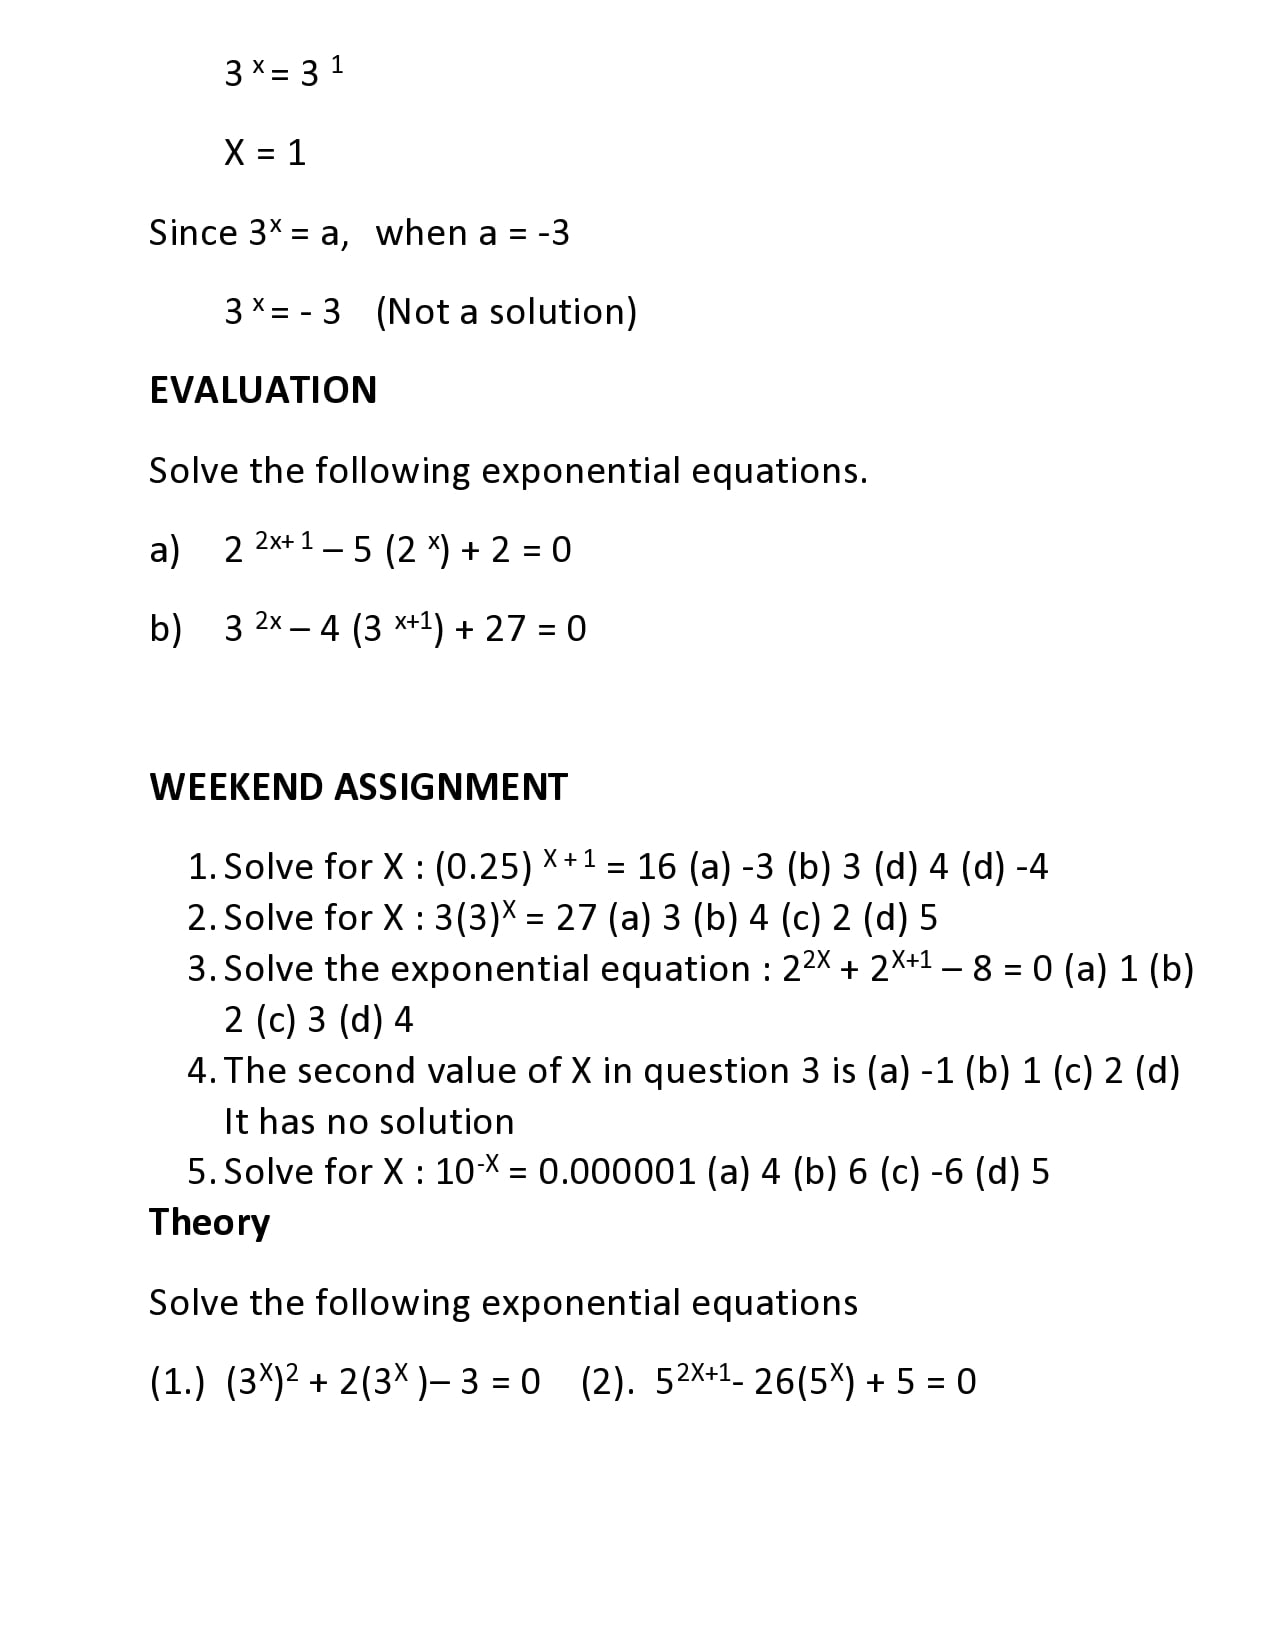 INDICIAL/EXPONENTIAL EQUATION6